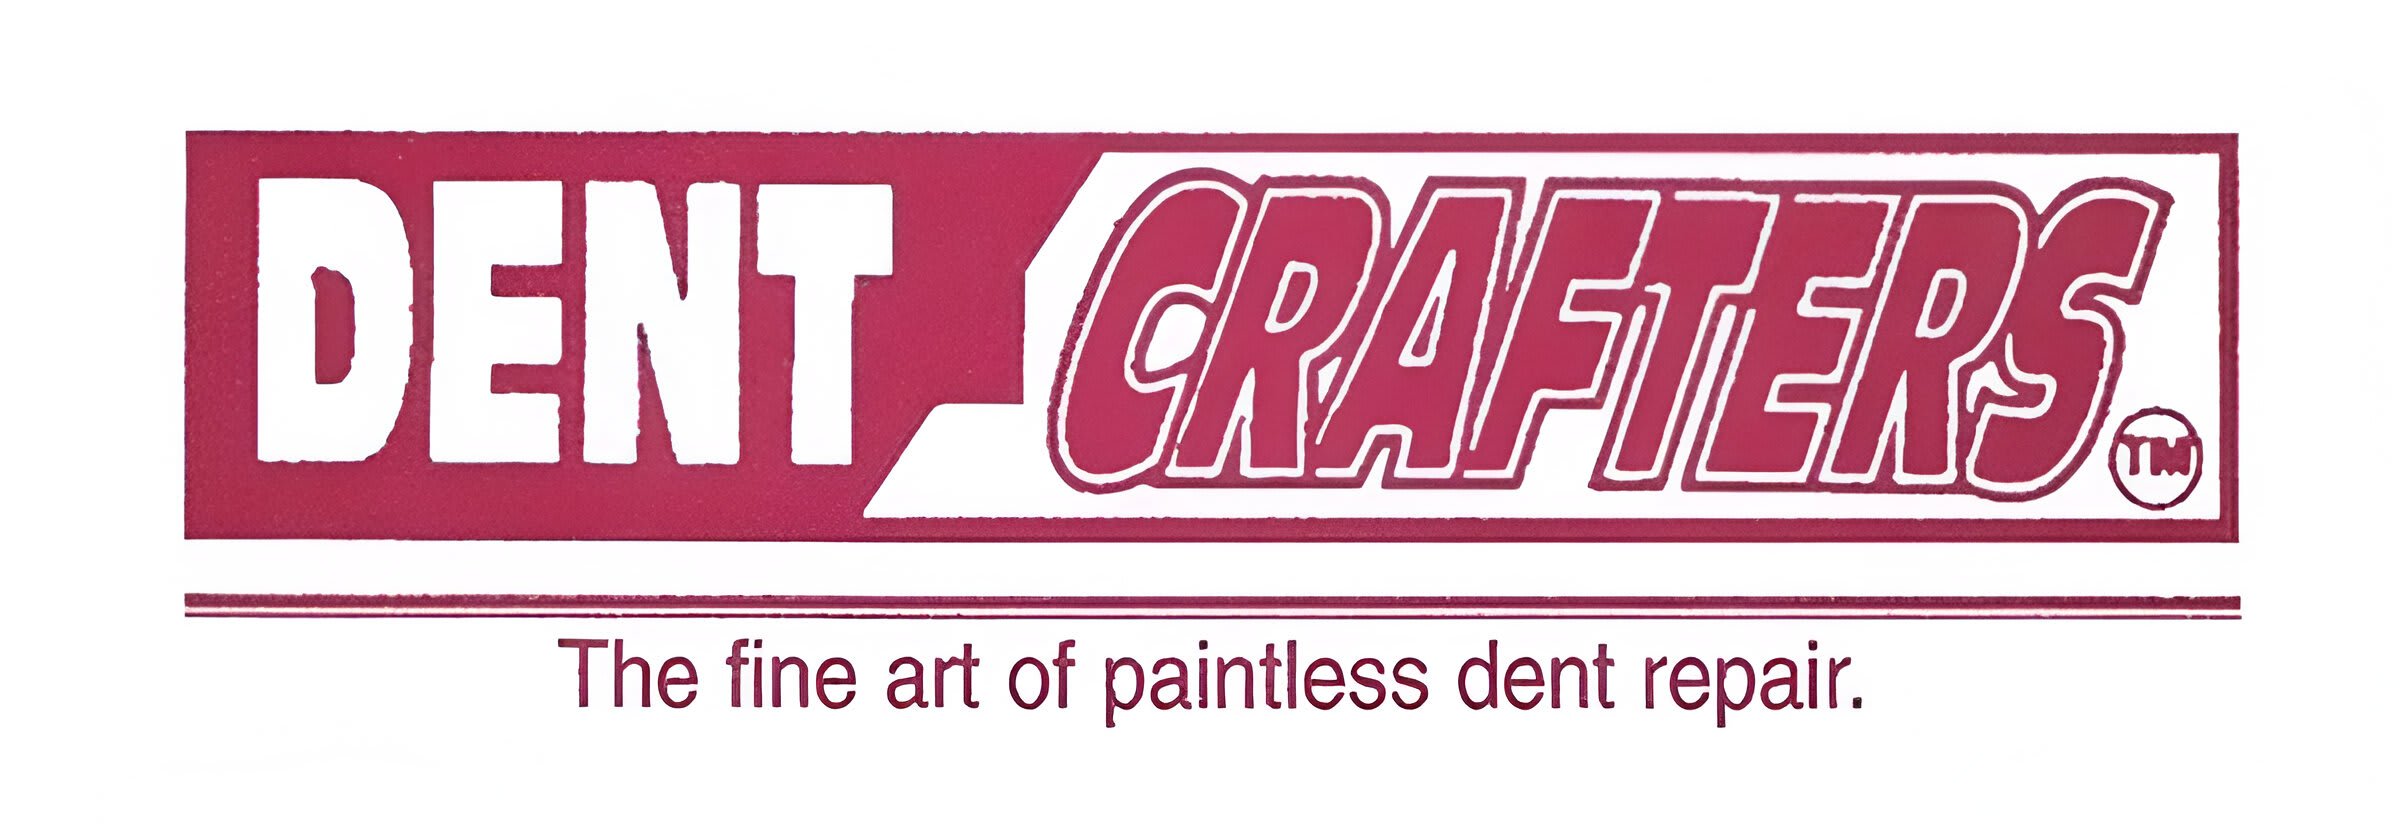 The Fine Art of Paintless Dent Repair, and more....